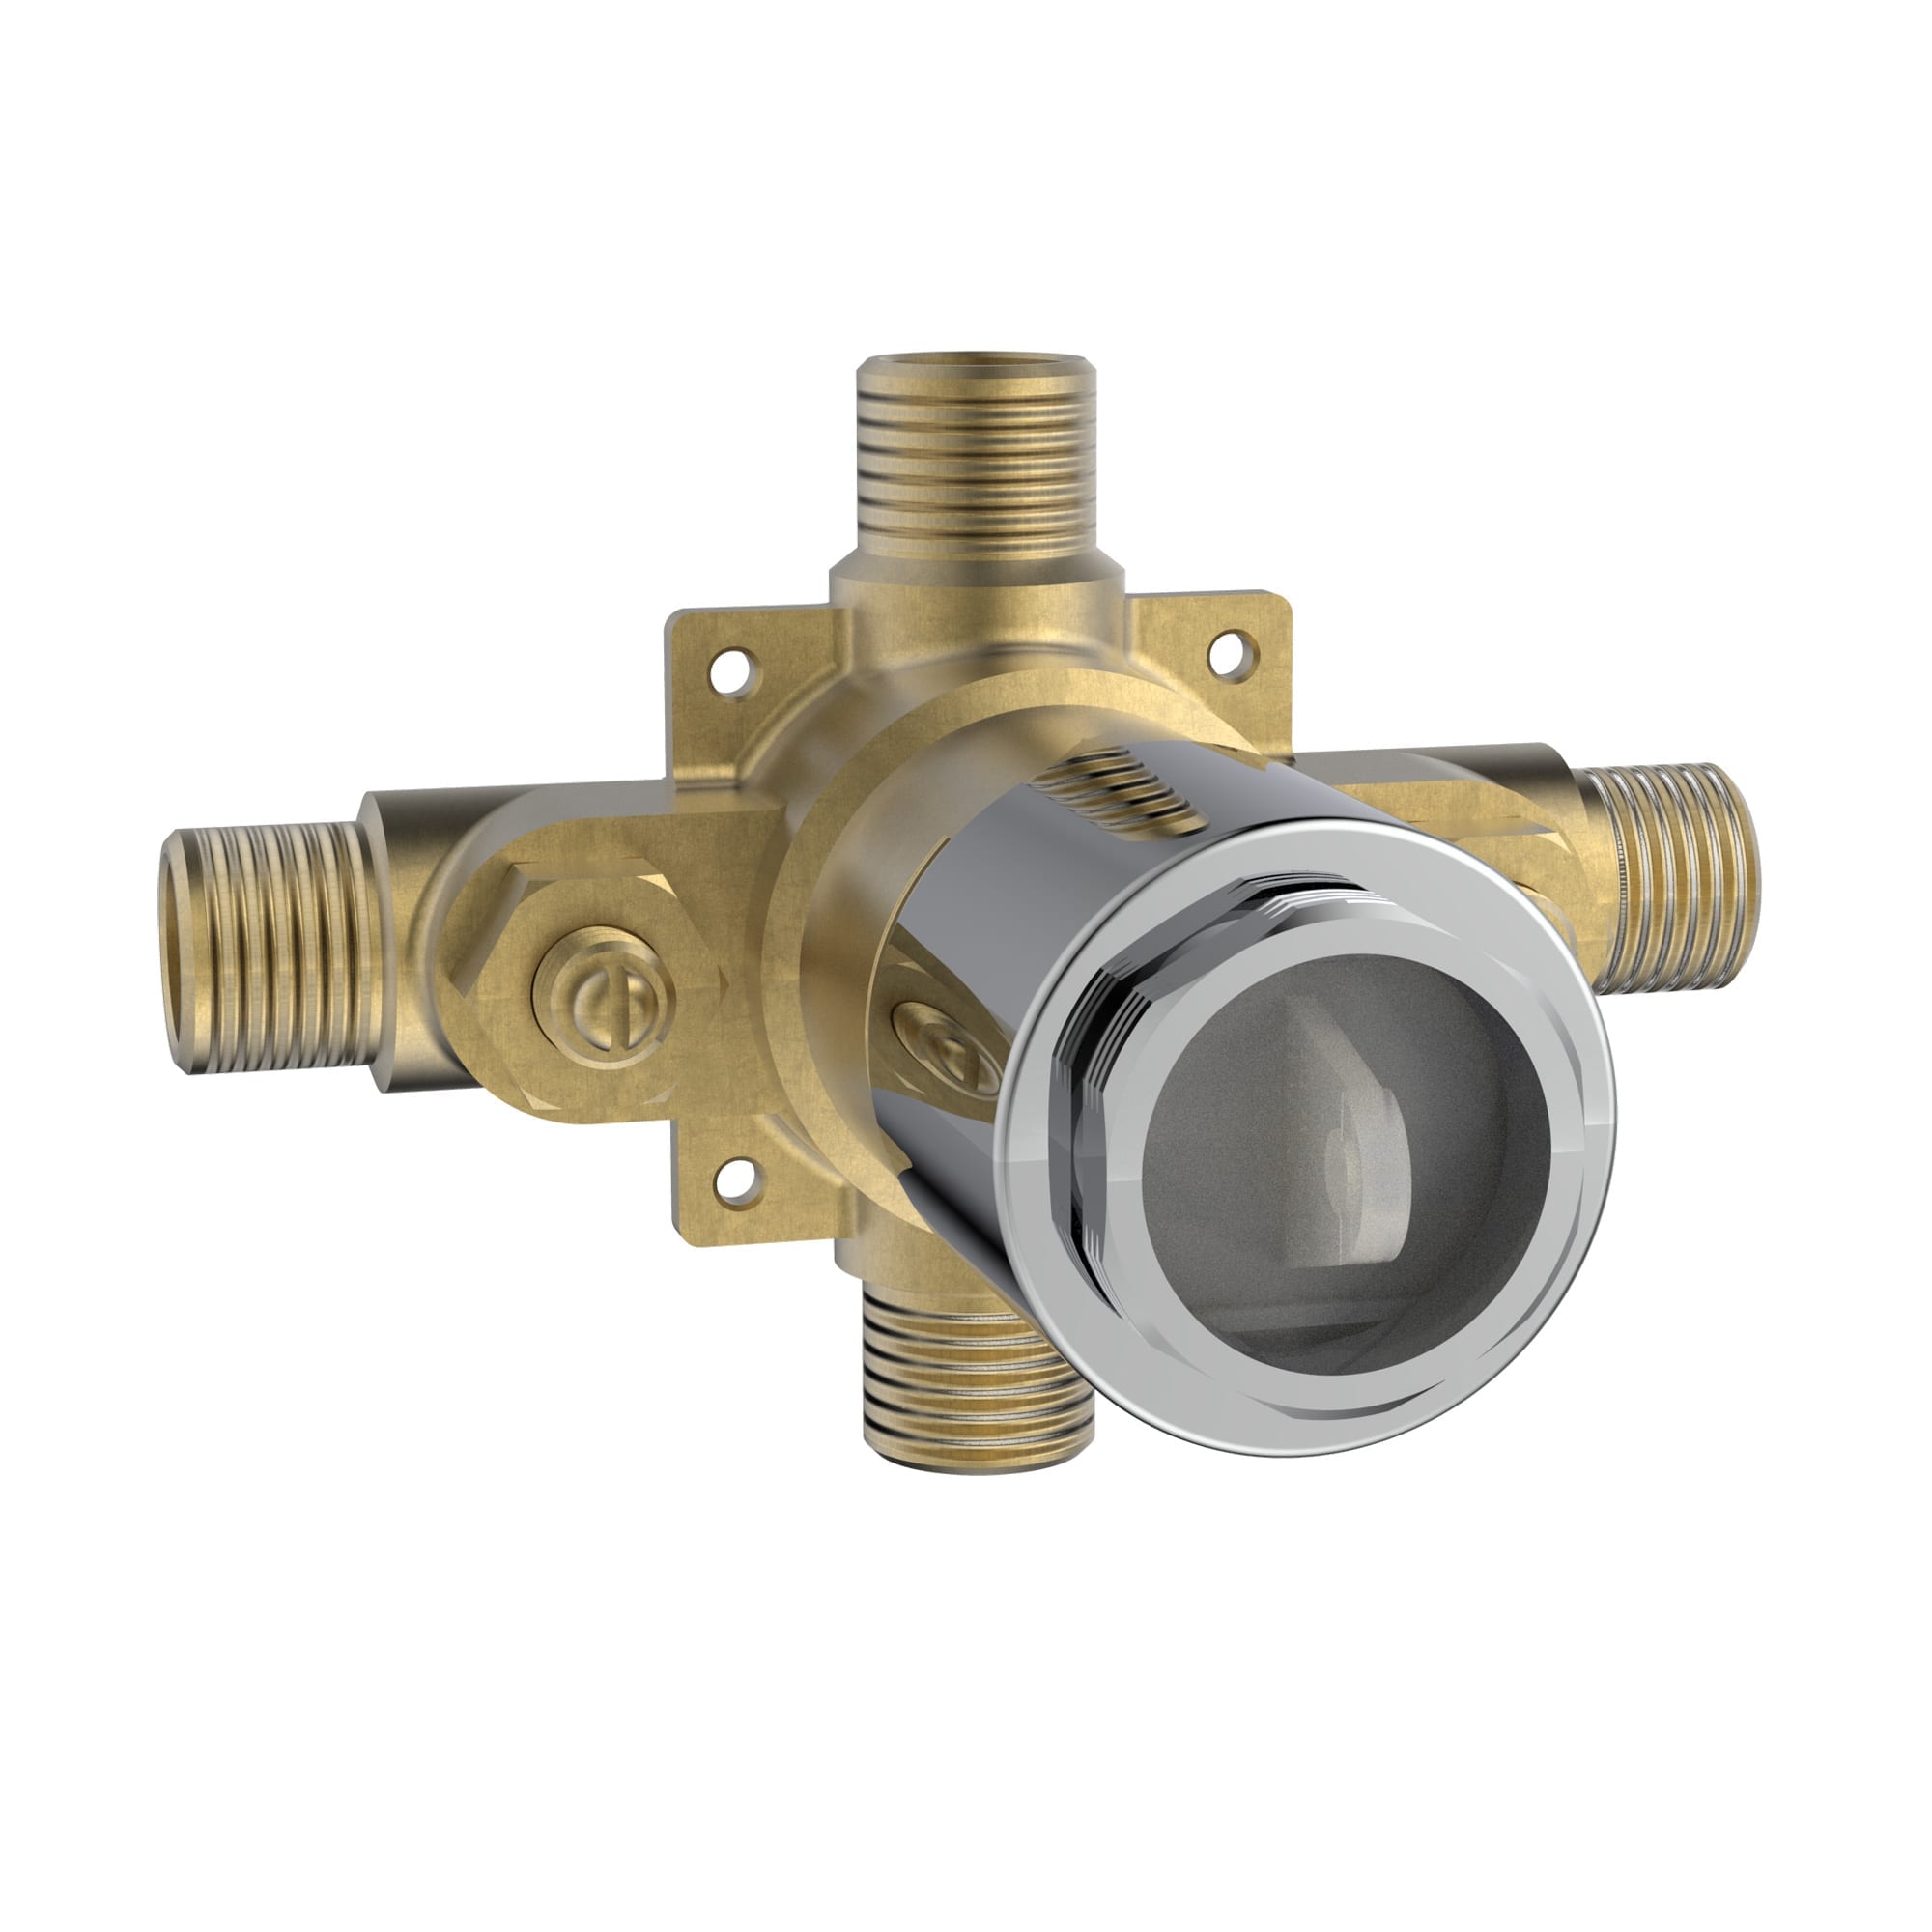 Bélanger 90TPVSR- Pb Thermo Rough-In Valve For Copper Connection W/Check Stops